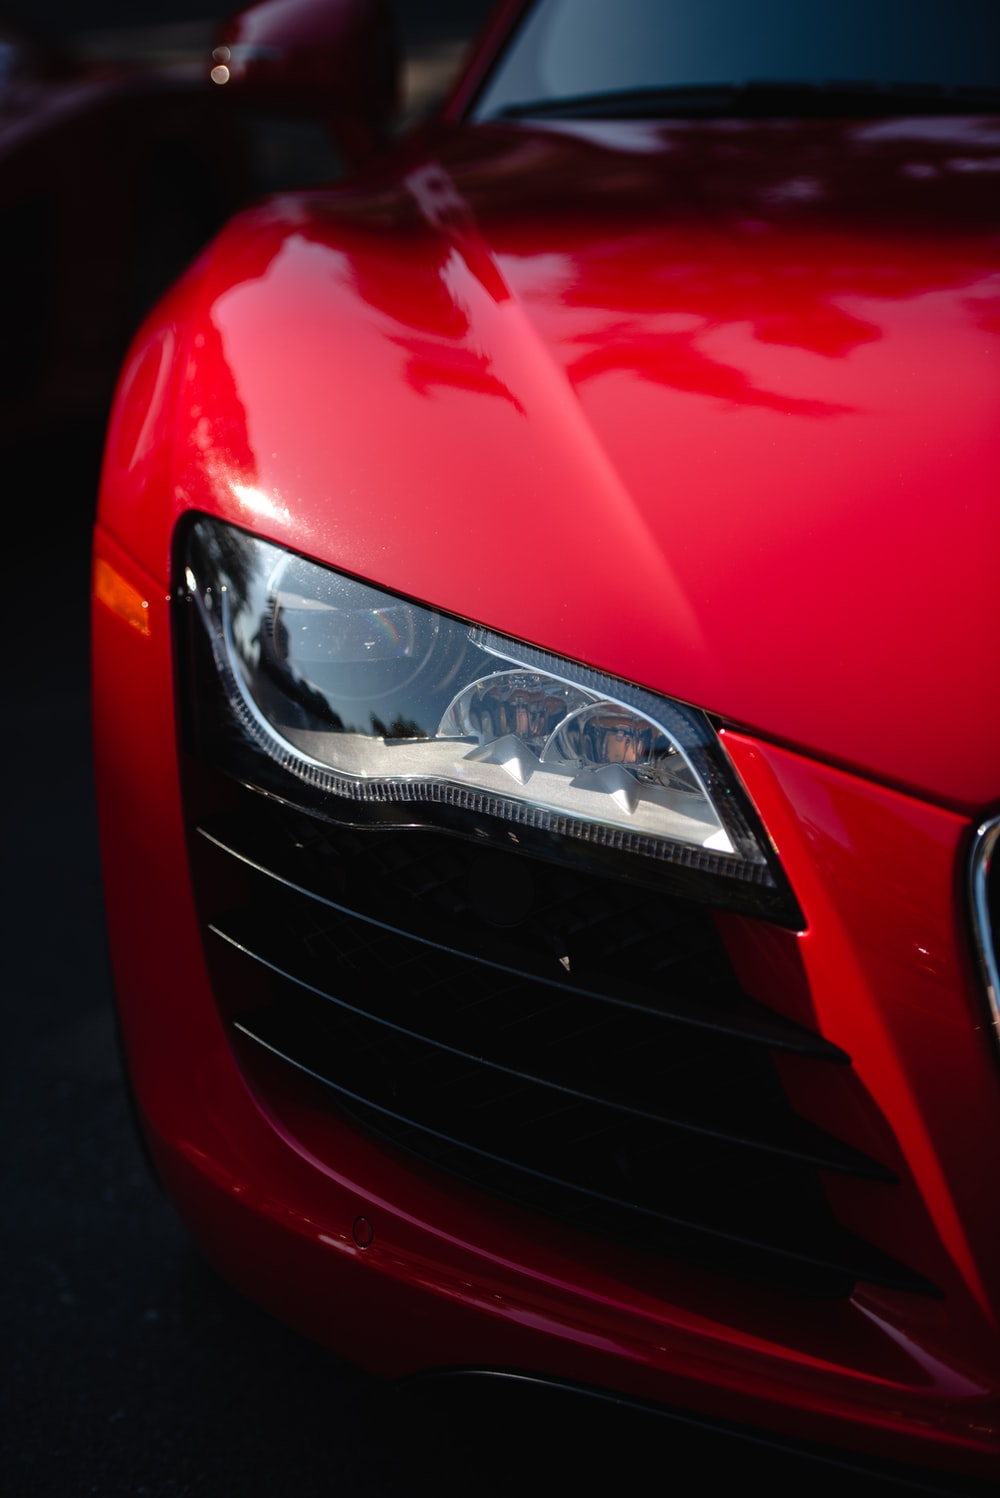 Red Car Picture. Download Free Image